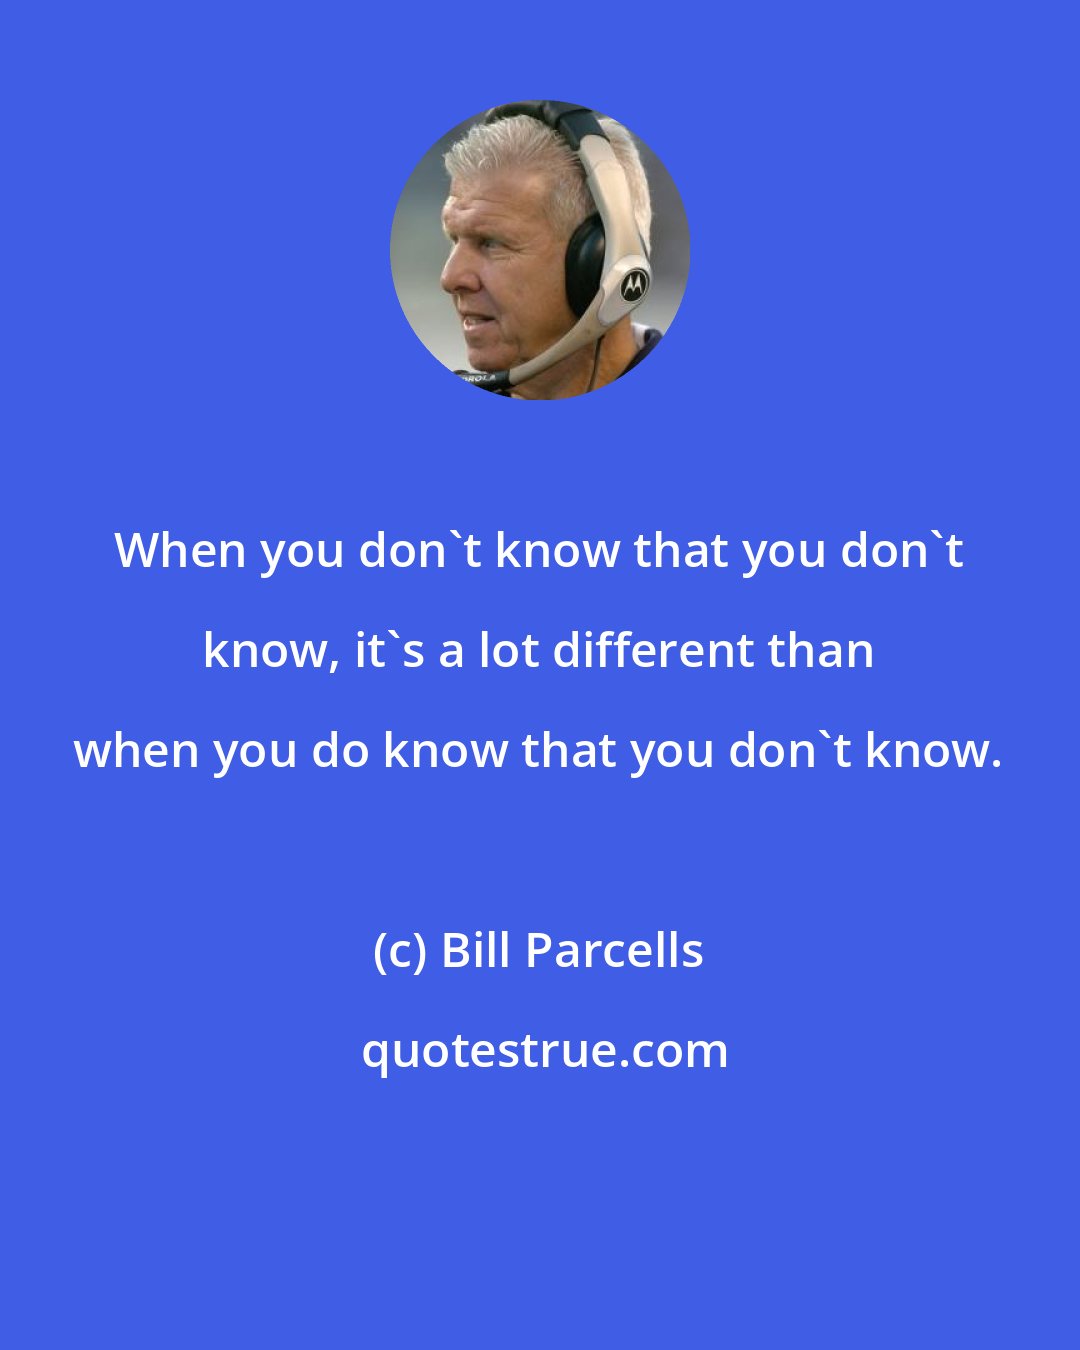 Bill Parcells: When you don't know that you don't know, it's a lot different than when you do know that you don't know.